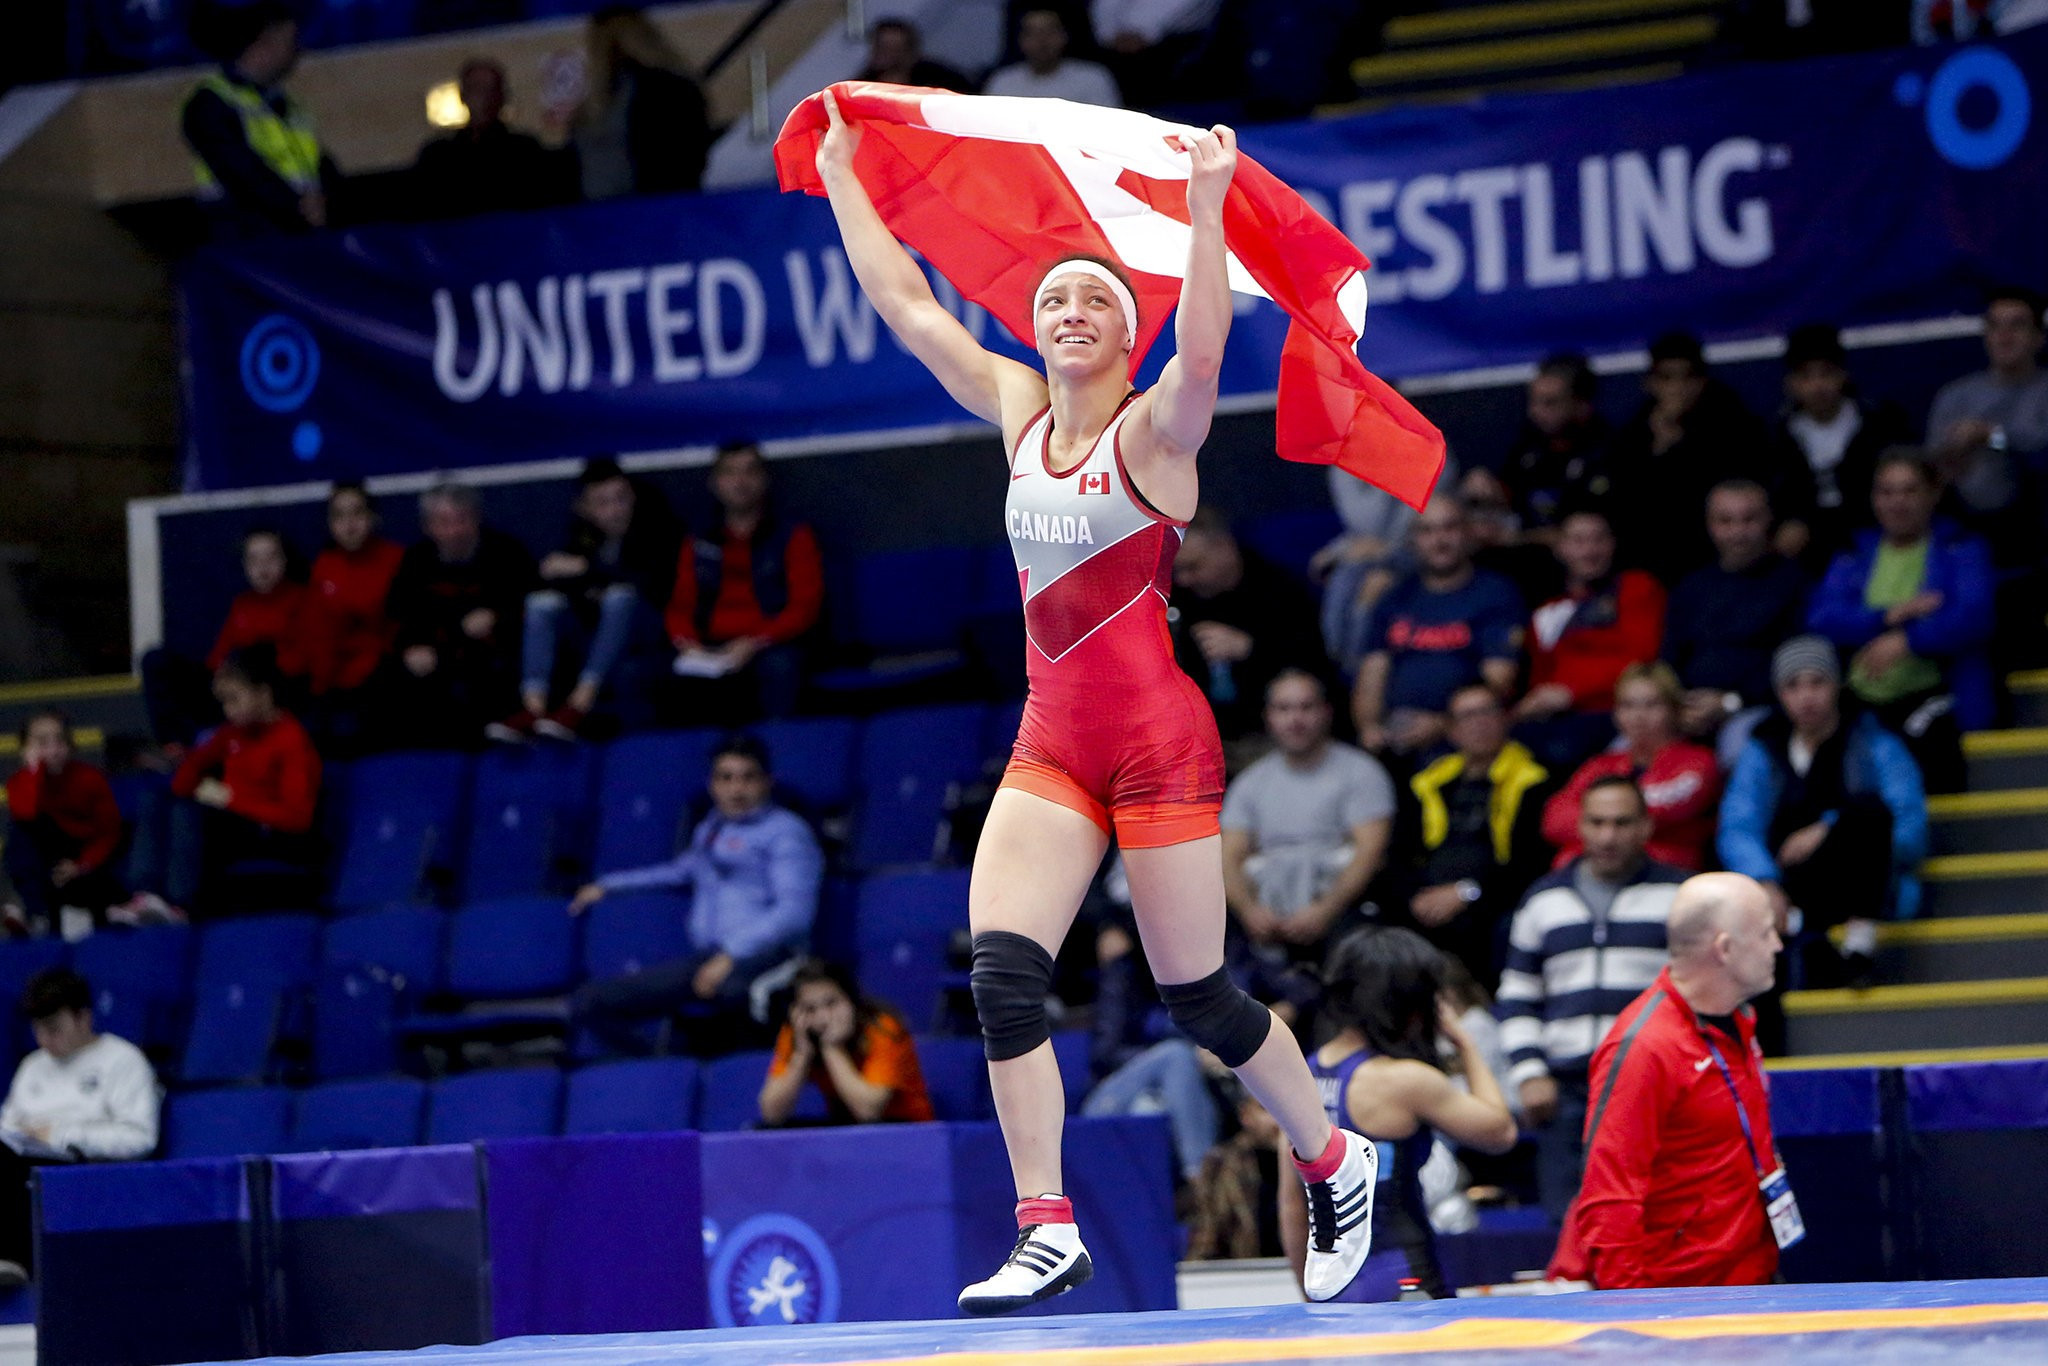 Canada’s Alexandria Rebekkah Town won the 57kg final to claim her country's first gold at the Championships ©Wrestling Canada